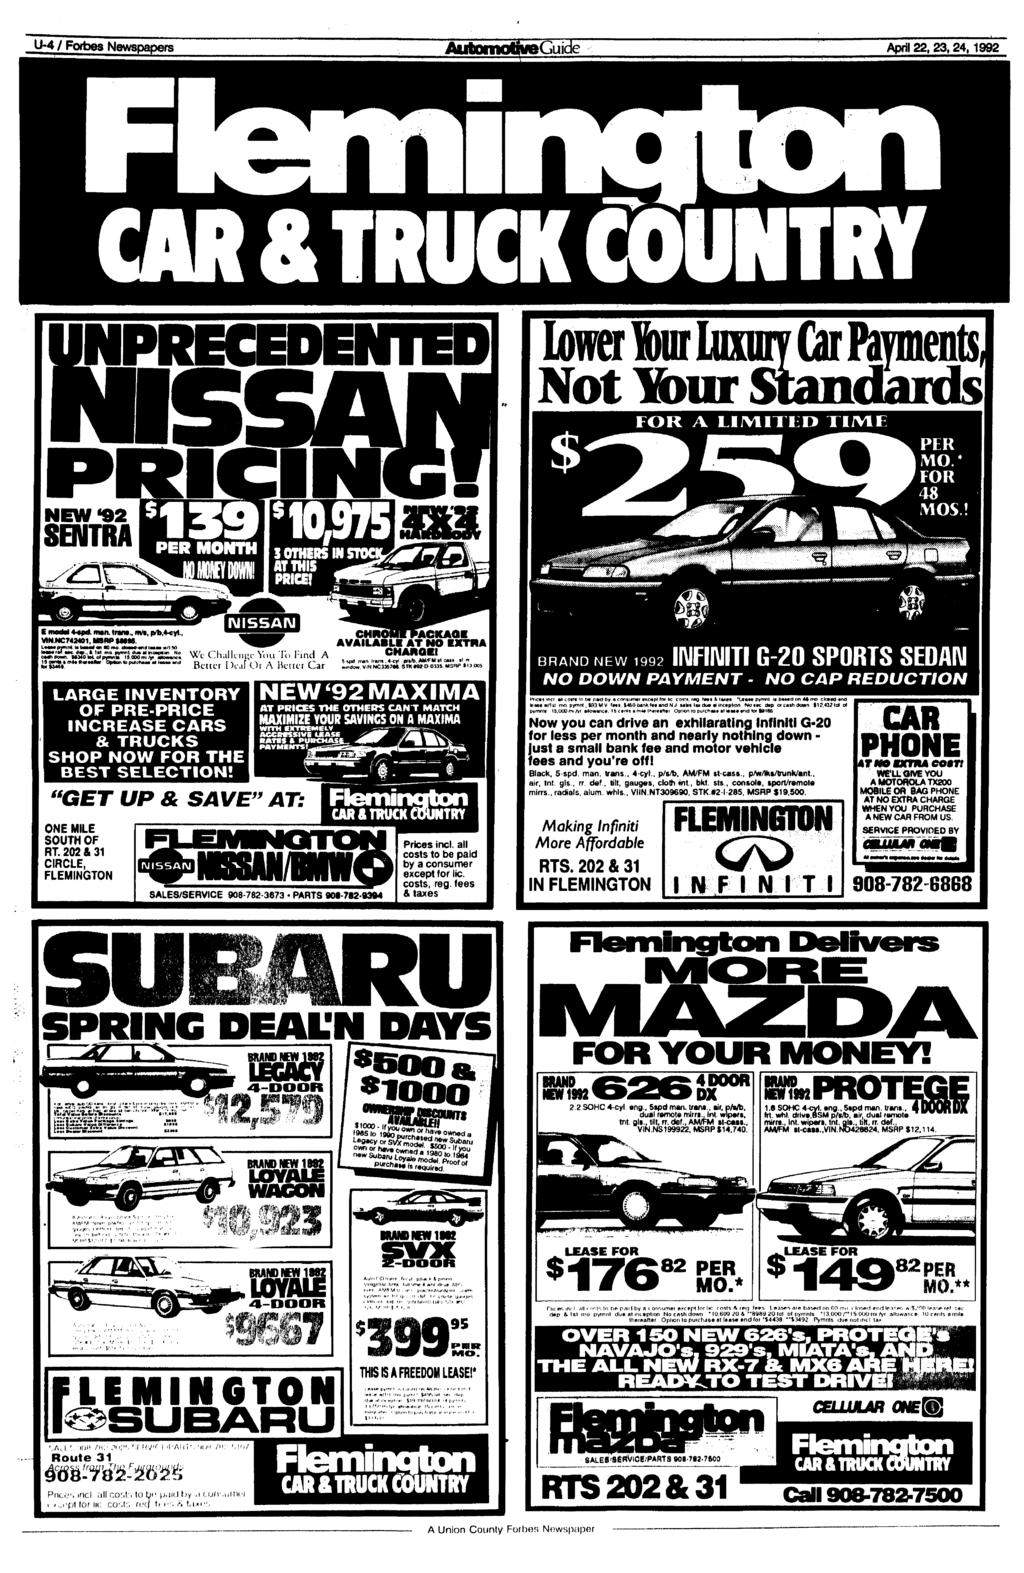 U»4 / Forbes Newspapers JUitomotfreGuide April 22, 23,24,1992 lower ftur luxury Car Payments Not Ifour Standards FOR A LIMITED PER MO* FOR MOS! E modal 4*pd man. trana., nrt, p*,4<yt.